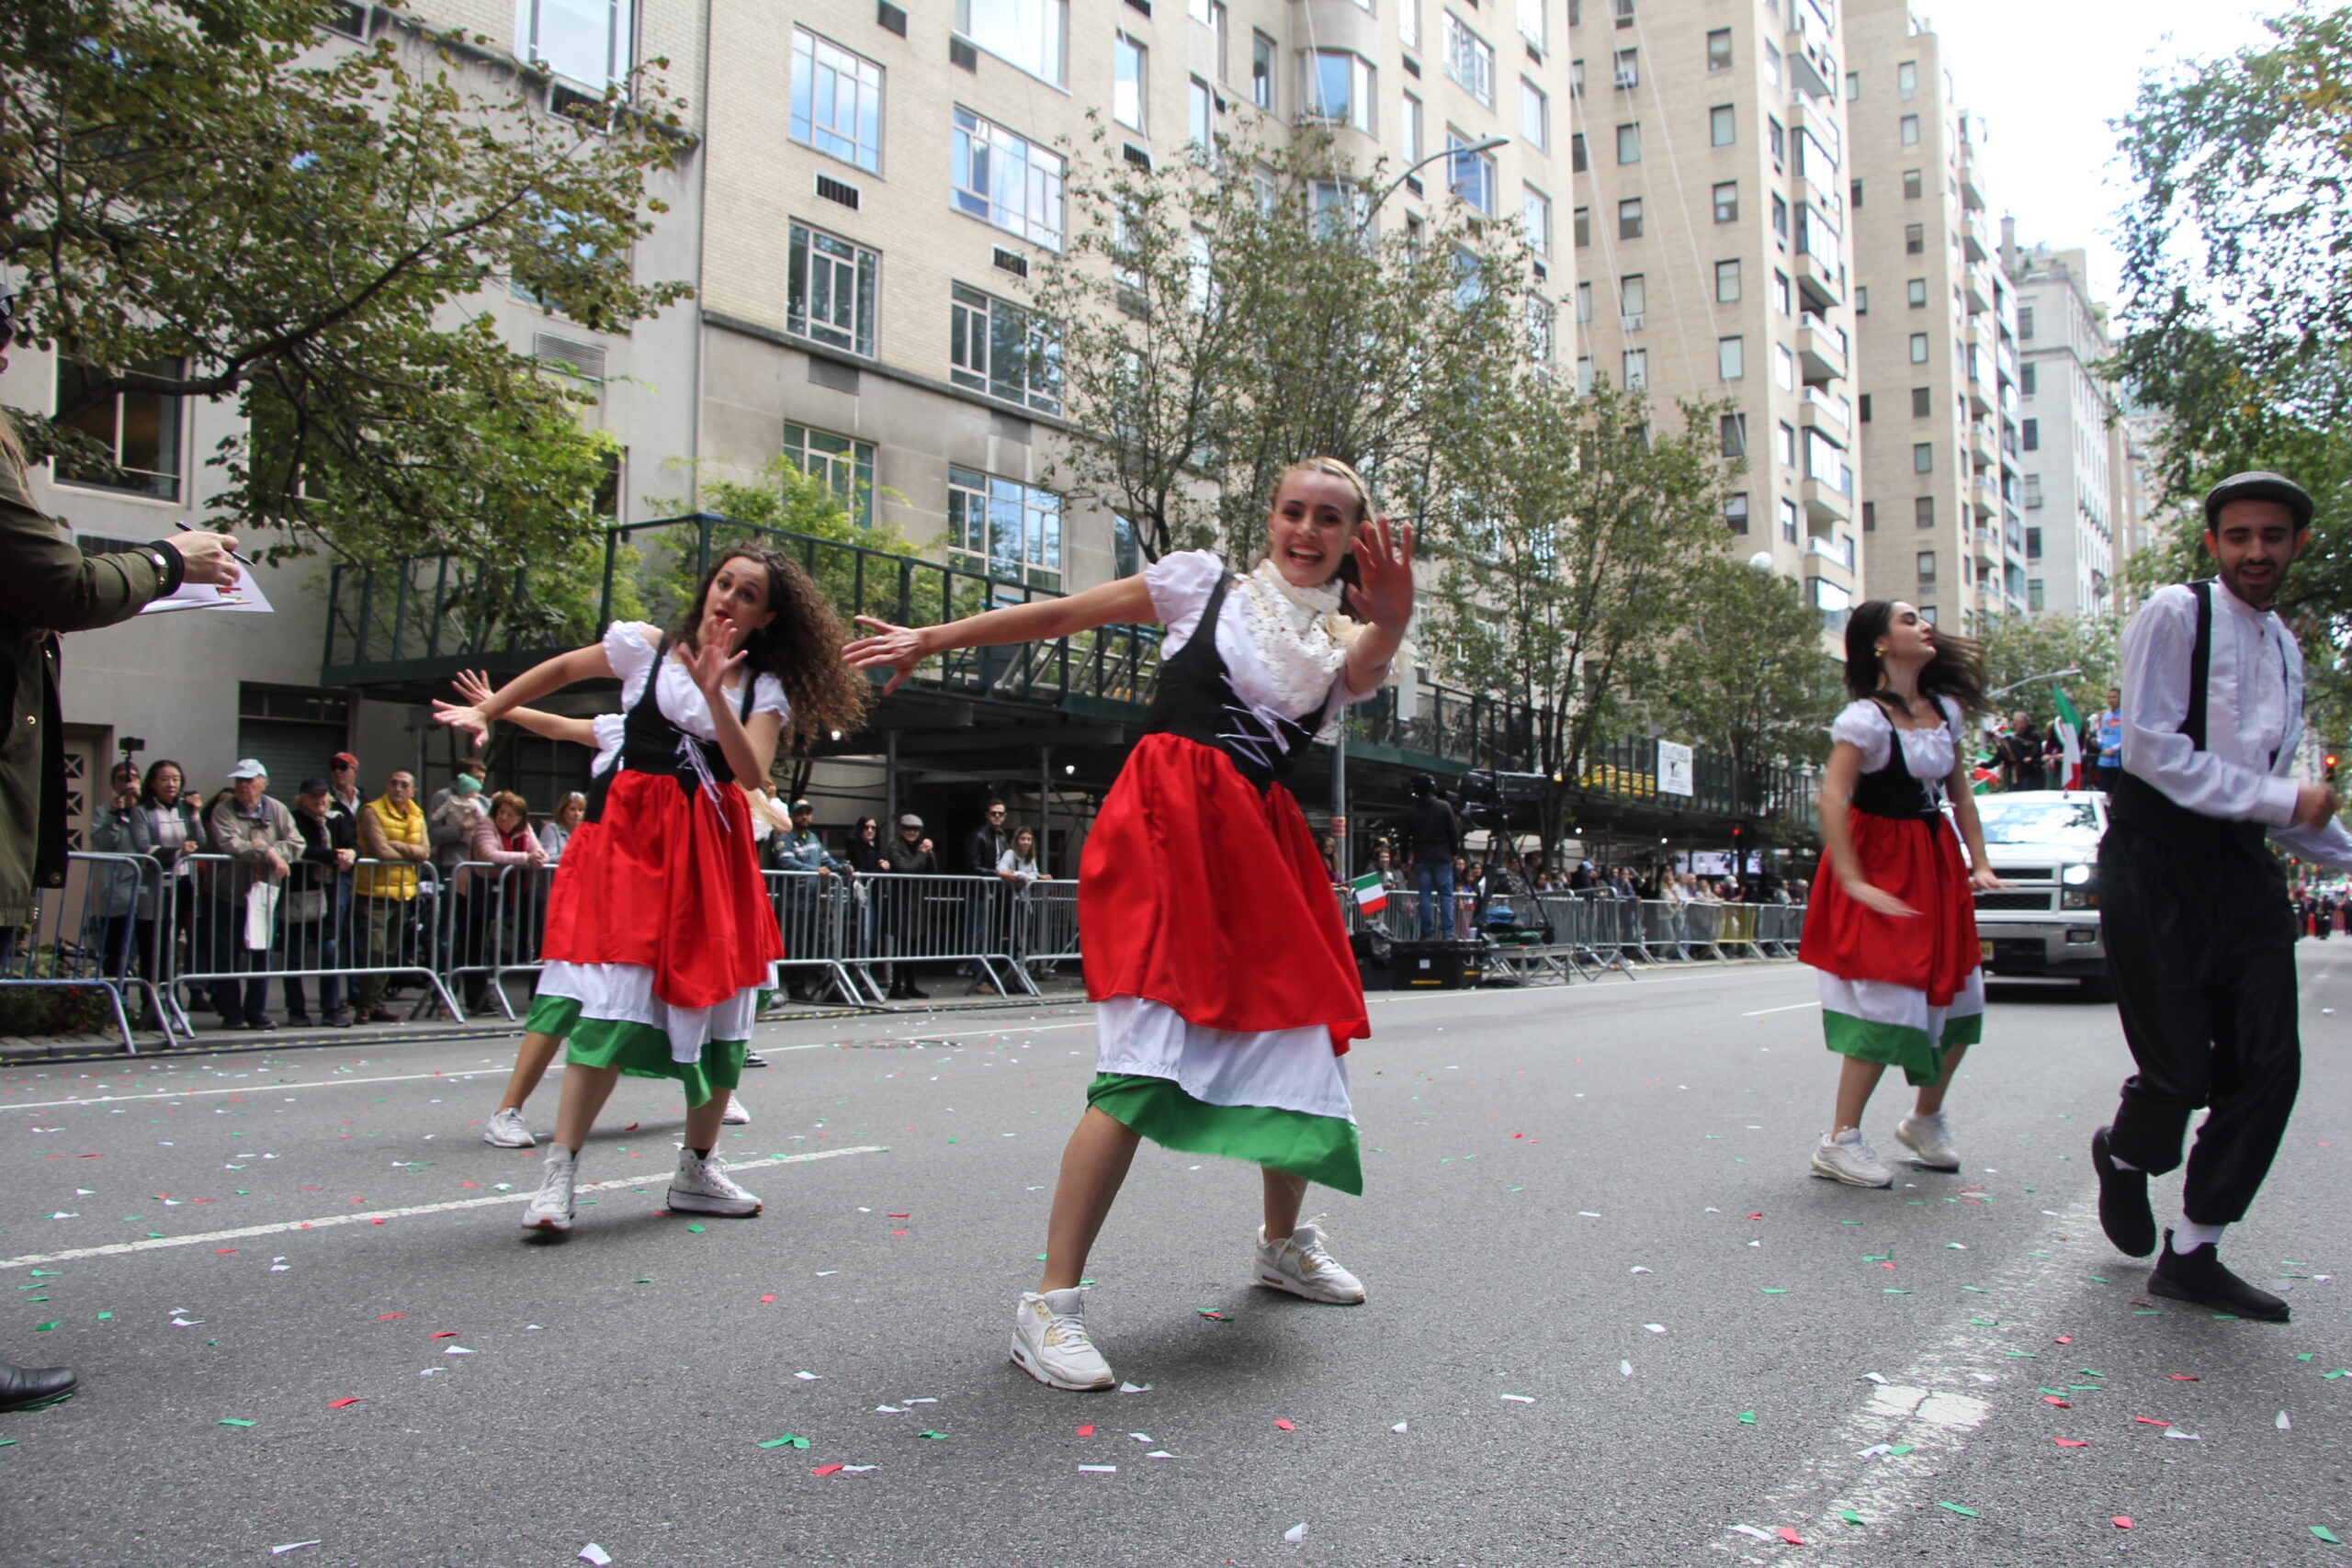 Women donned in Italian flag-colored dresses enliven the parade route, a vibrant display of Italy's cultural and aesthetic contributions to the American mosaic.